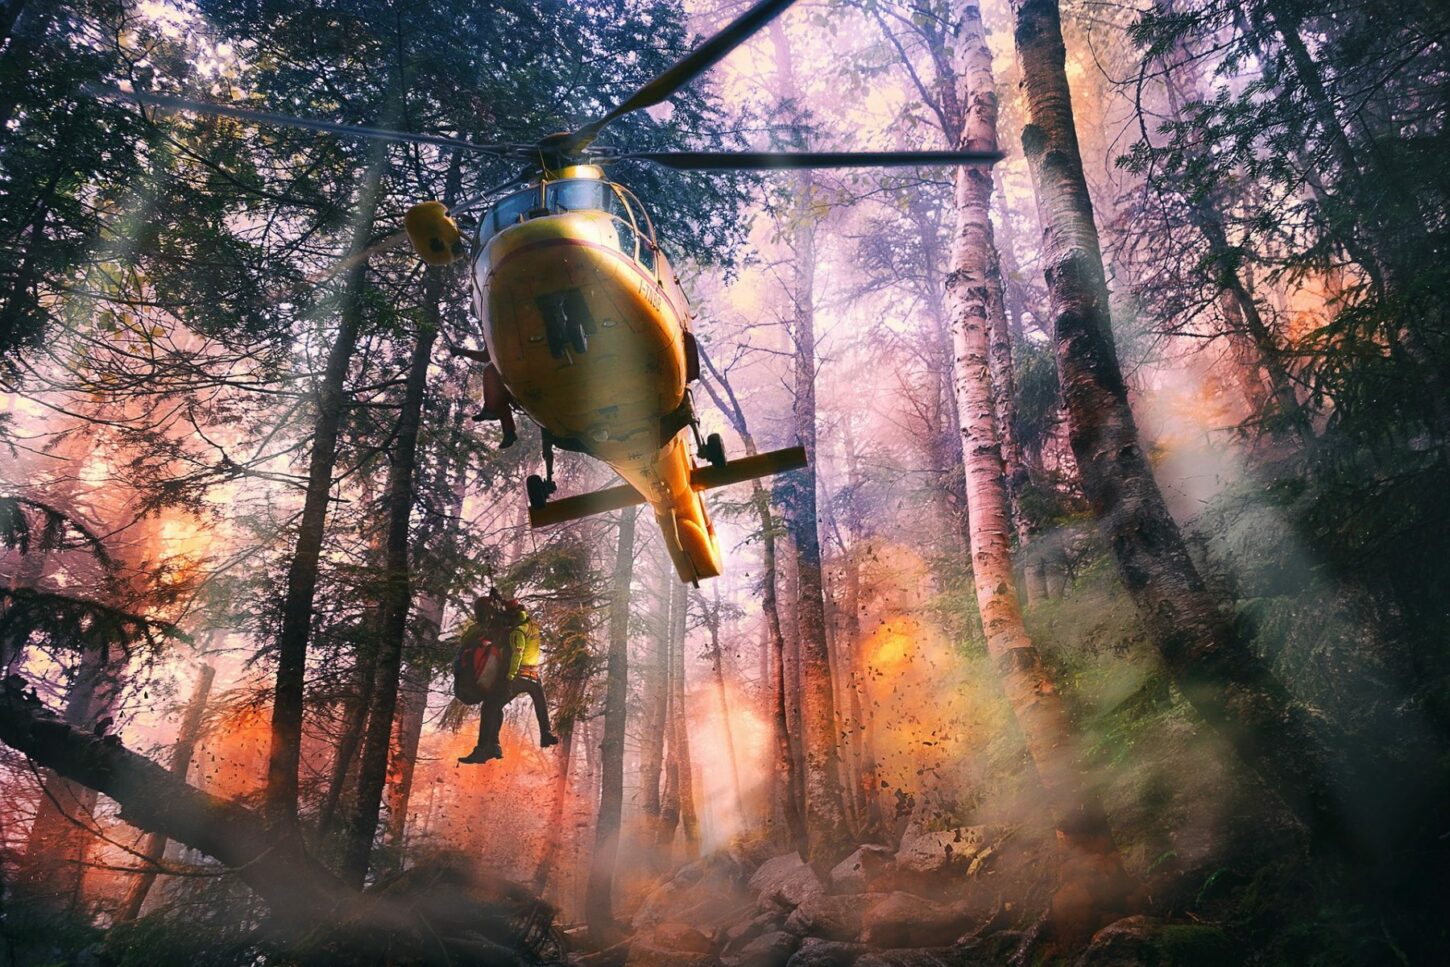 Fire helicopter in the middle of the forest